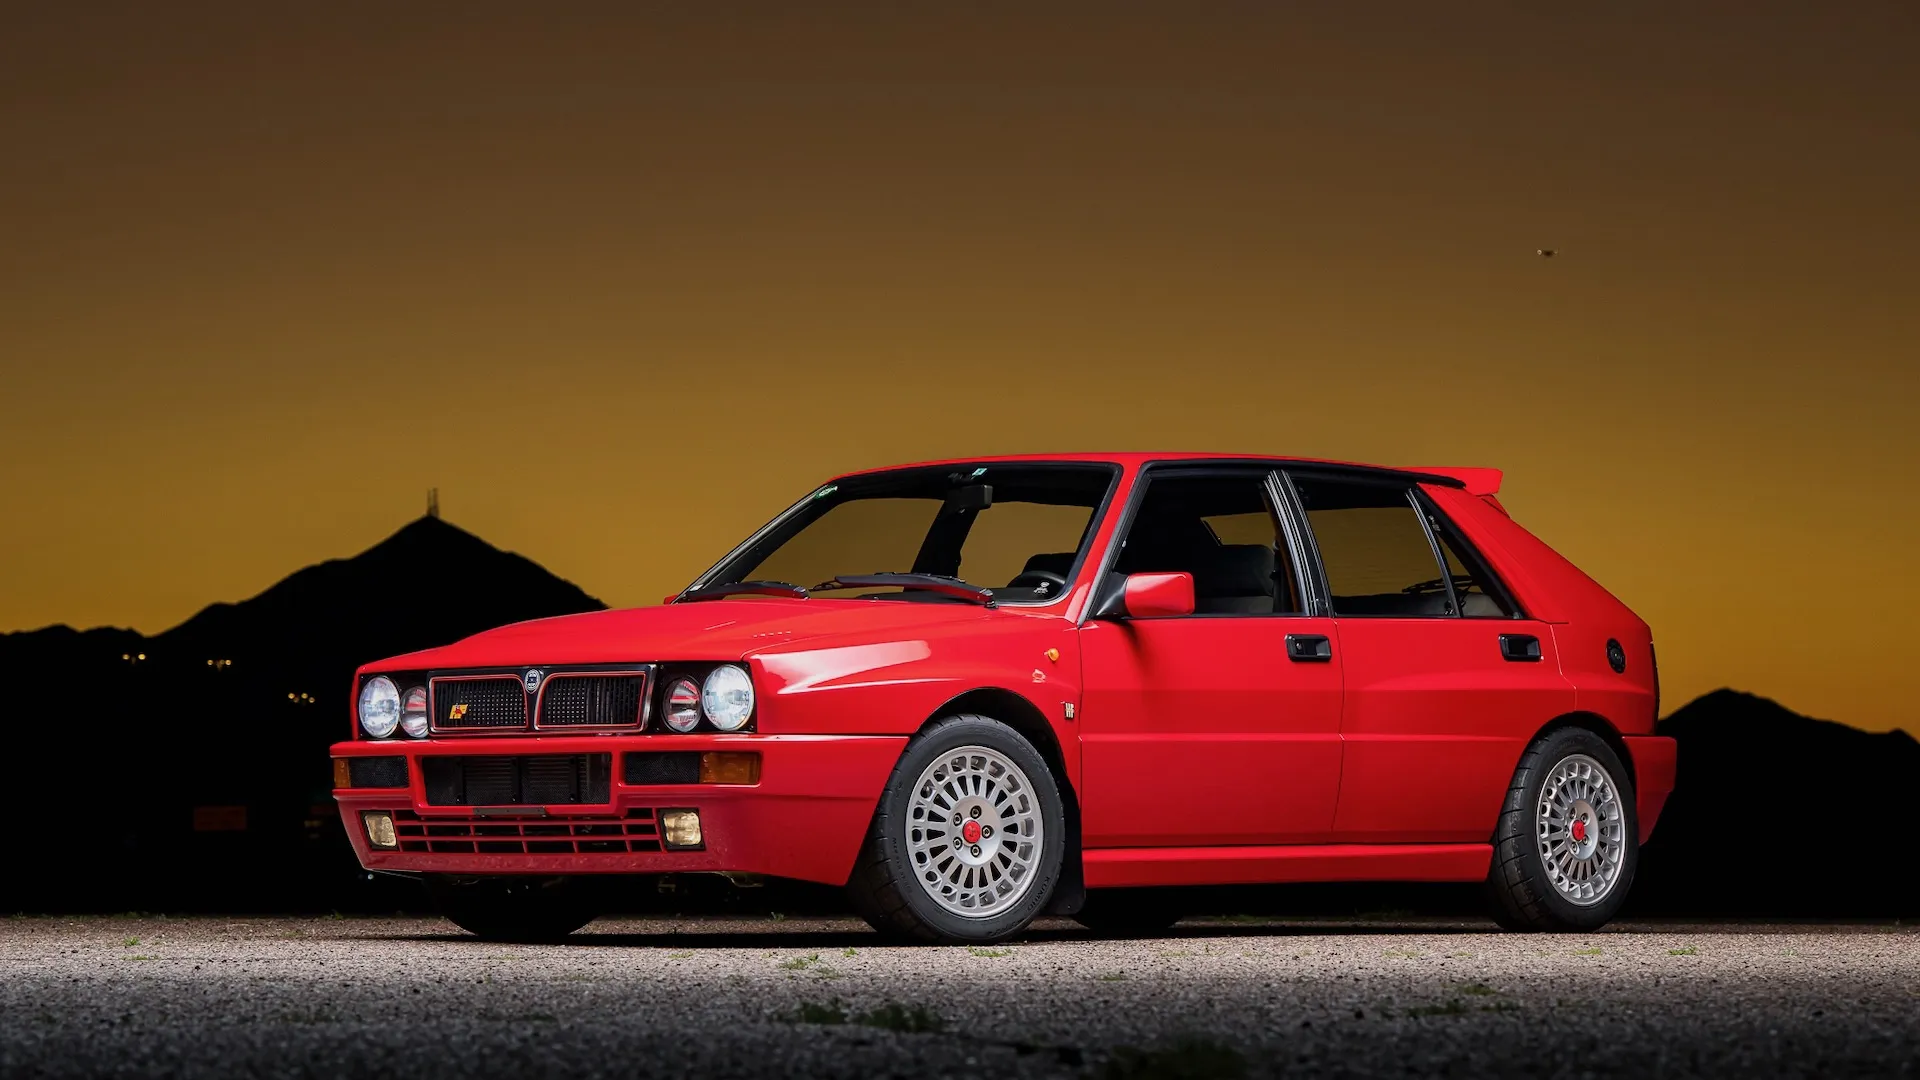 1992 Lancia Delta Integrale Evo 1 owned by Ralph Gilles for sale